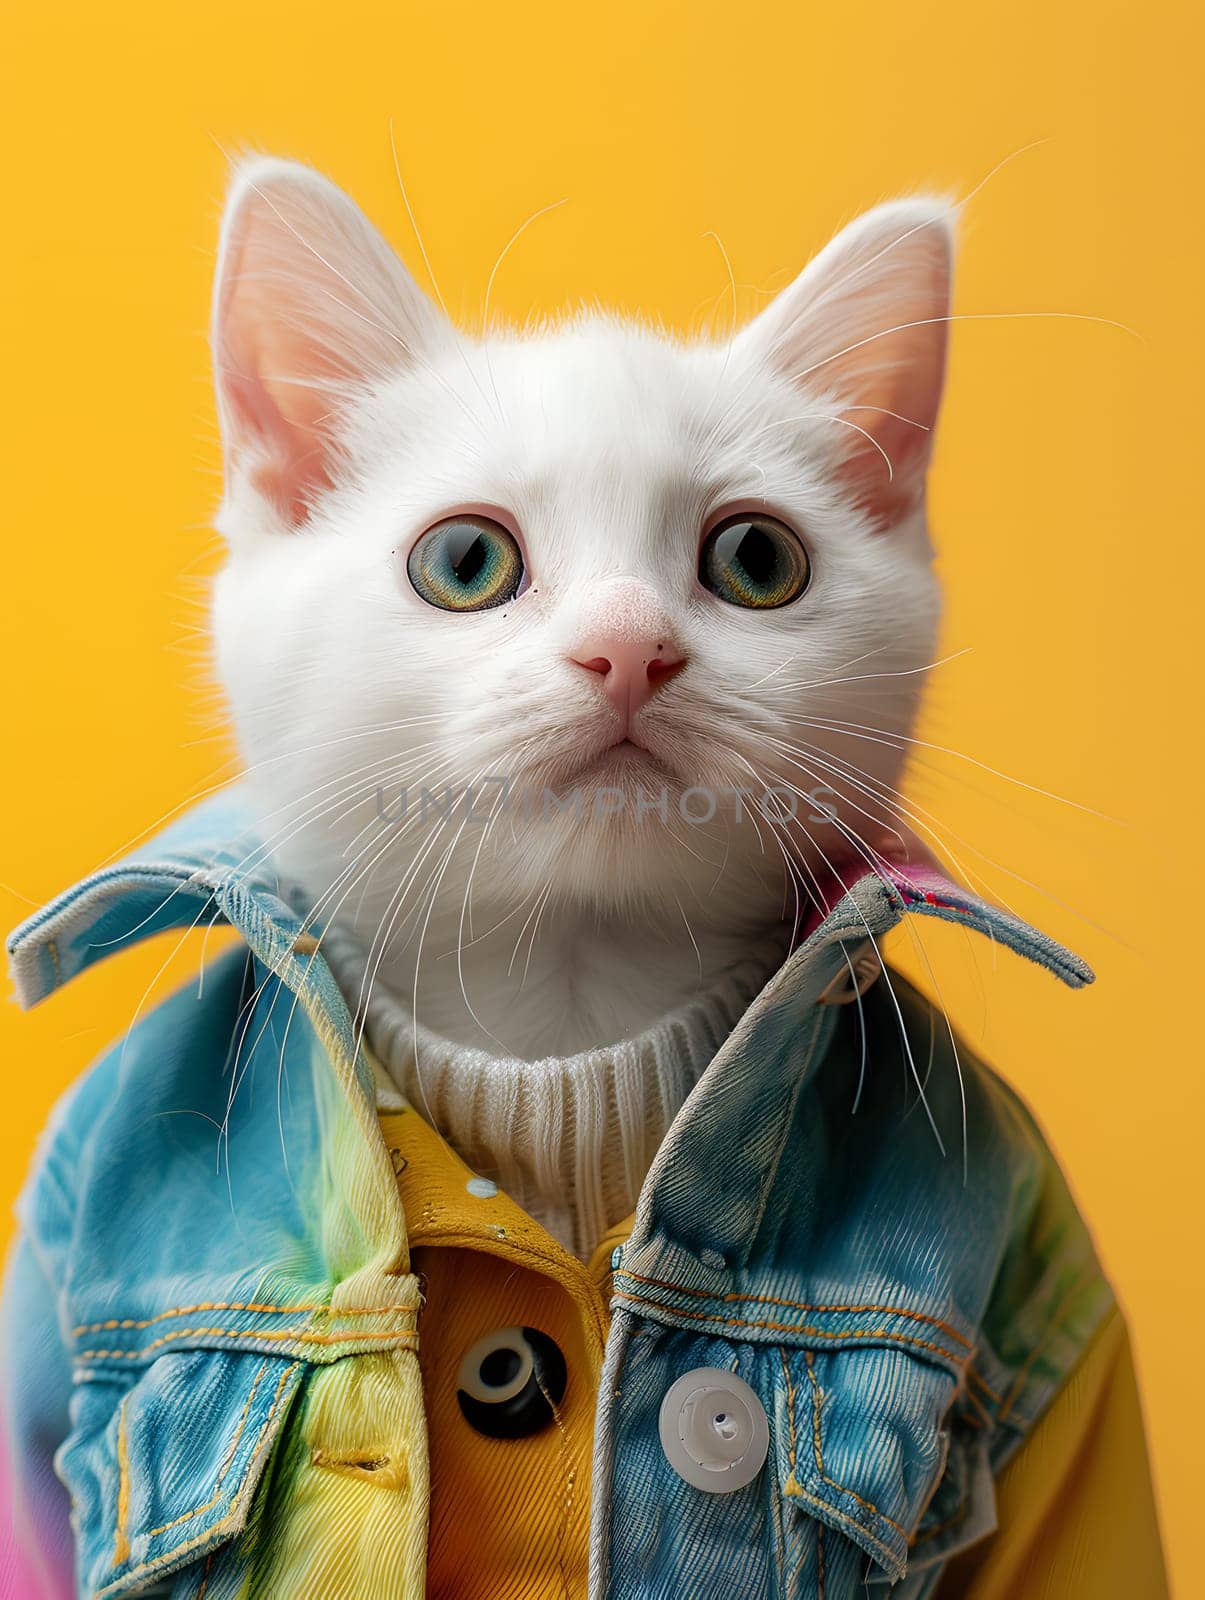 A Felidae cat is stylishly dressed in a denim jacket and sweater. With whiskers and a fawn snout, this carnivore looks trendy in creative arts collar from pet supply store